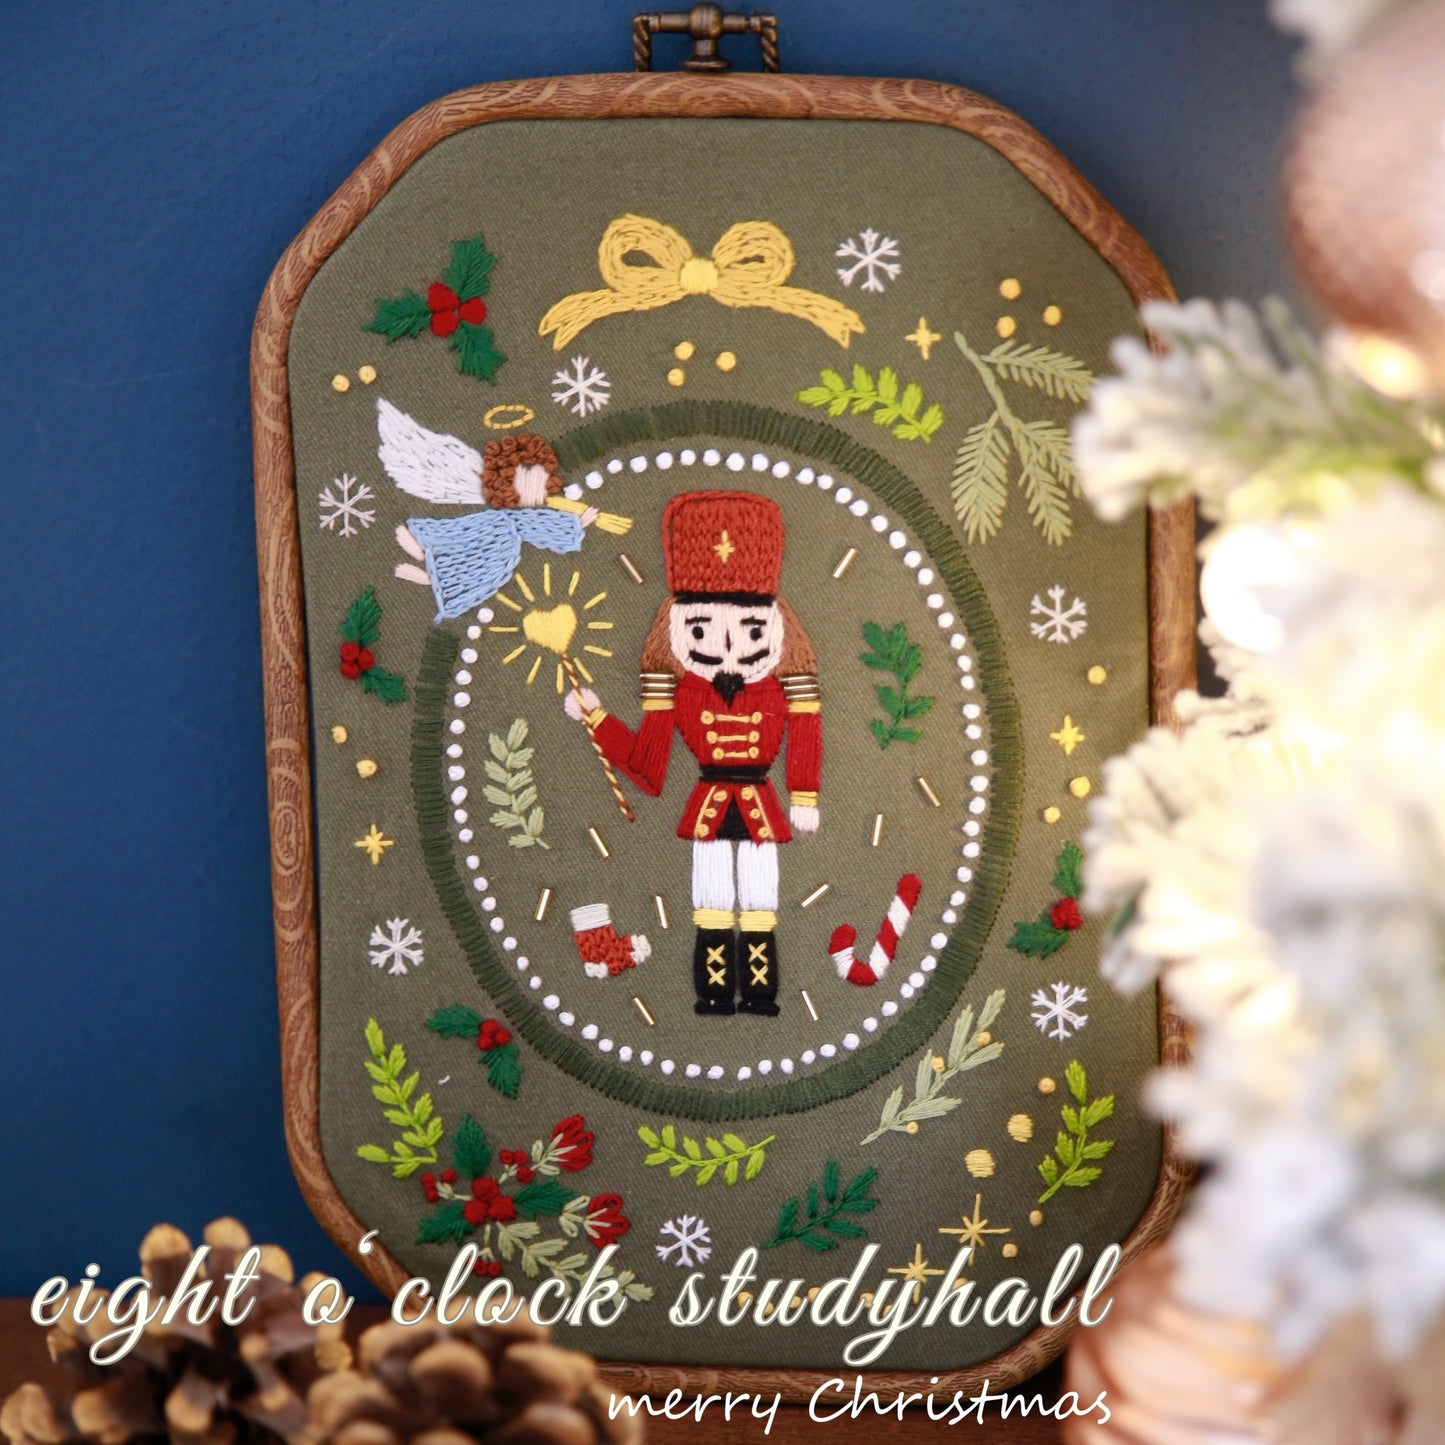 DIY 《The Nutcracker》 Embroidery Craft Kit. Embroidery Beginner Kit 04